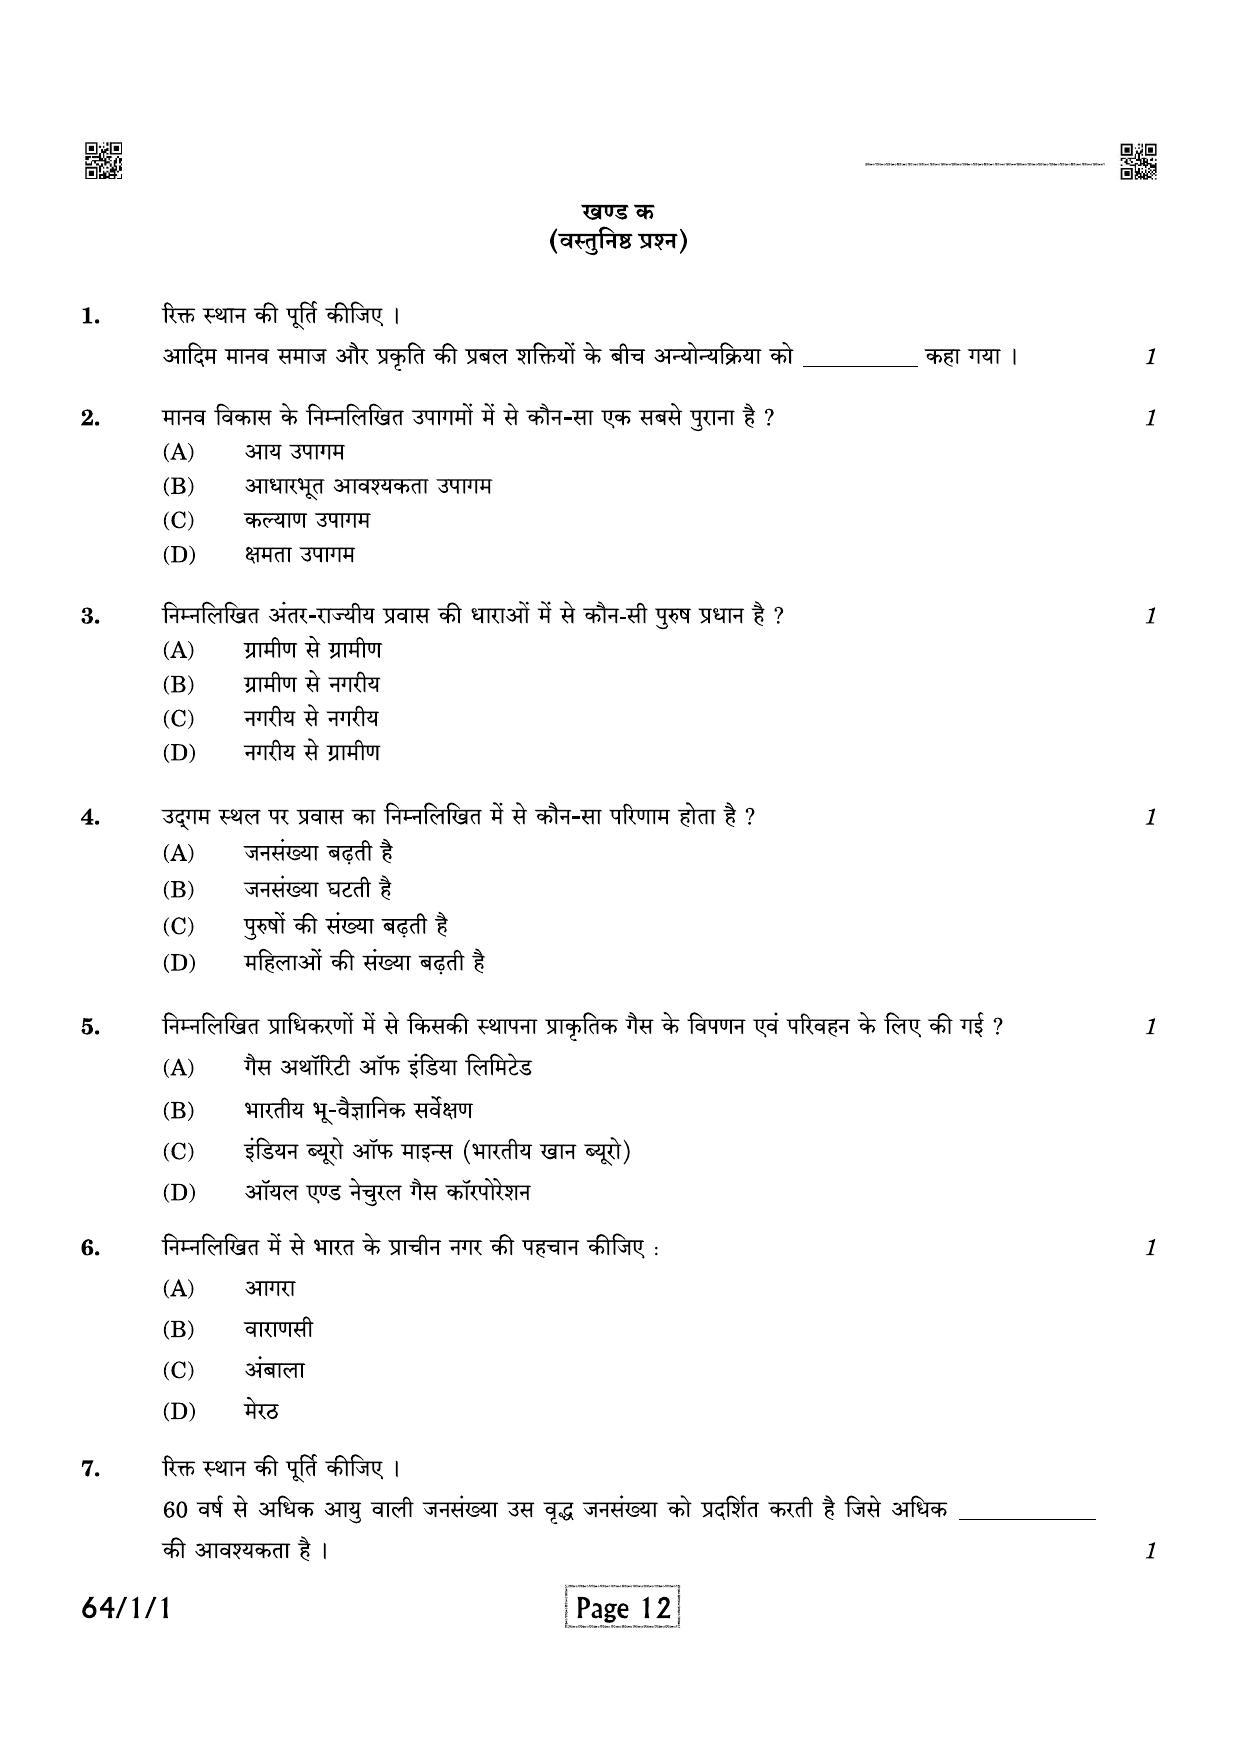 CBSE Class 12 QP_029_Geography 2021 Compartment Question Paper - Page 12